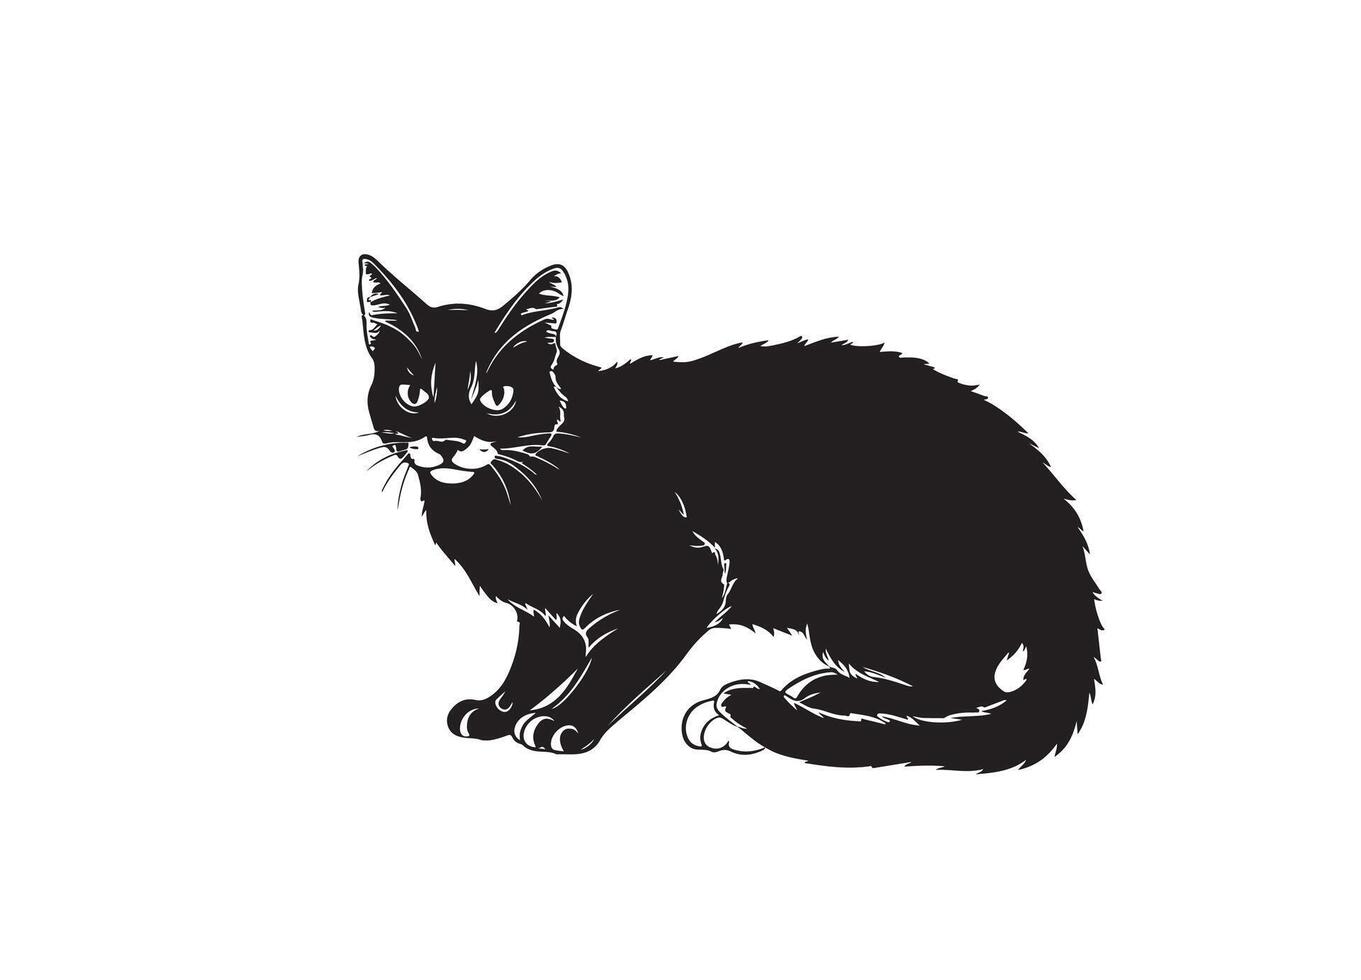 Cat silhouette vector illustration on a white background